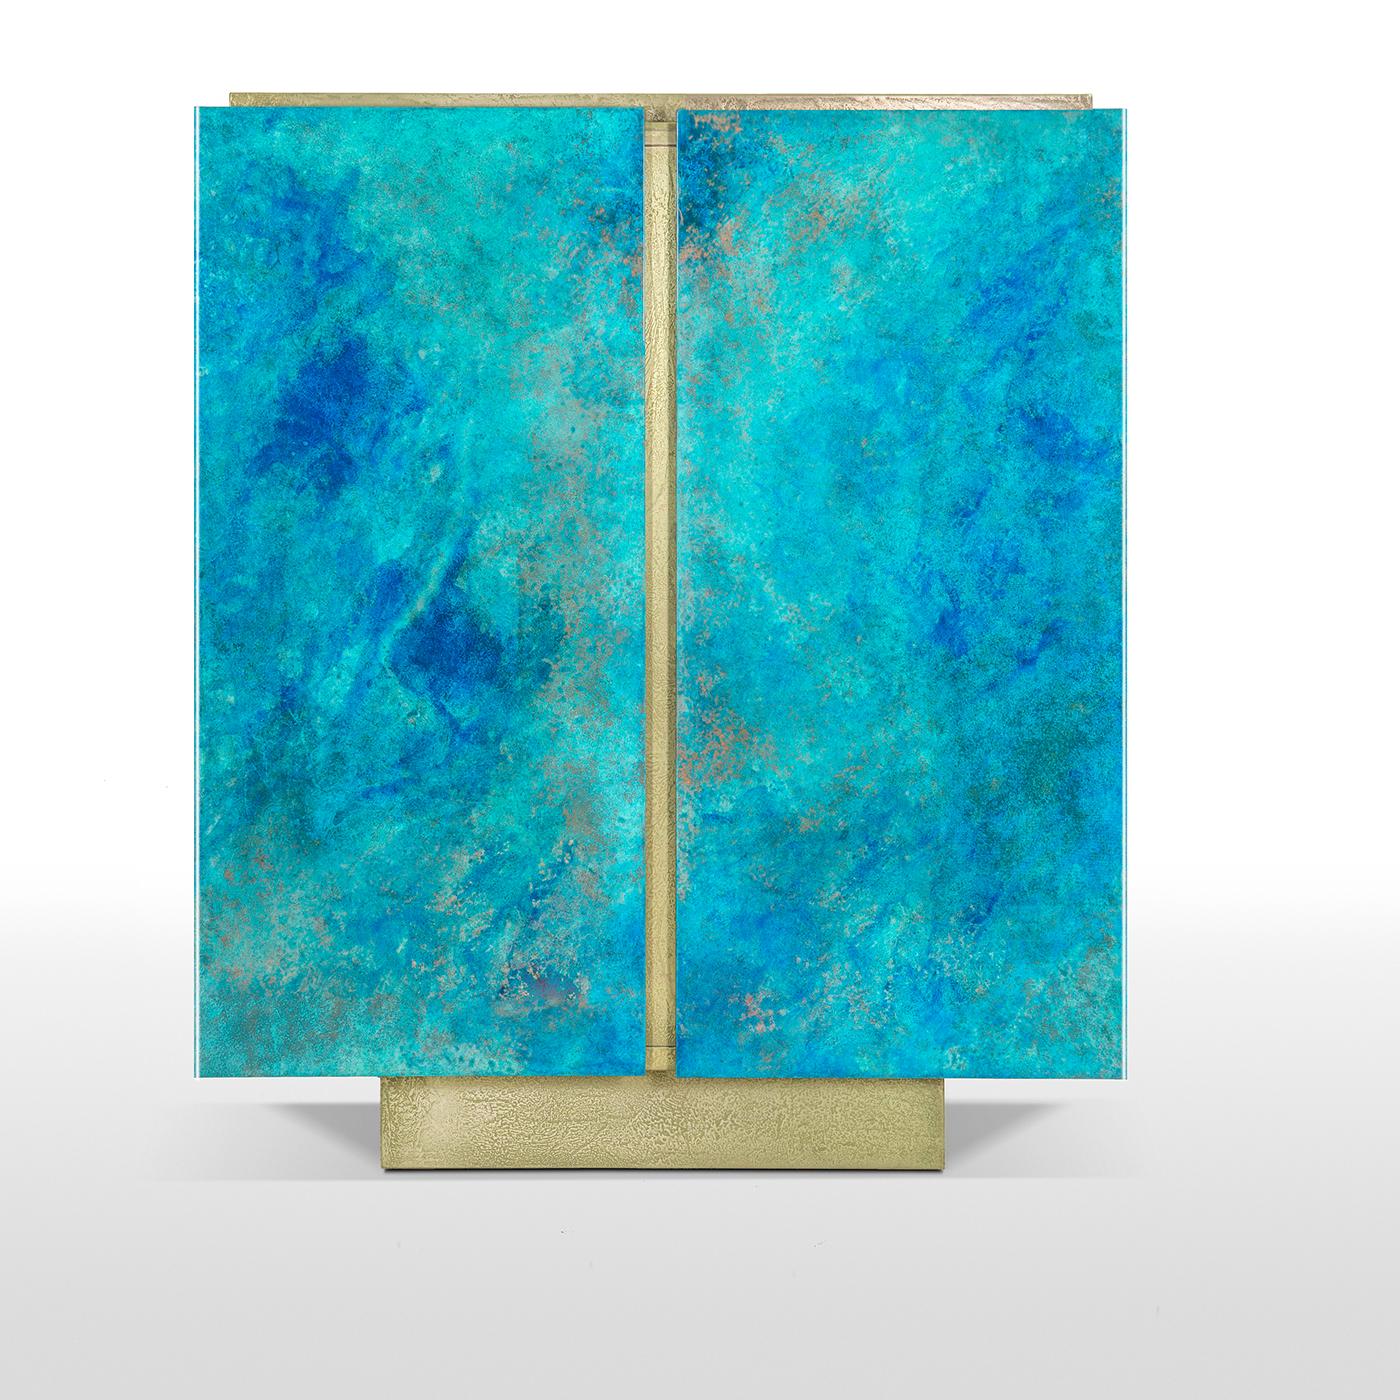 Sophisticated and eye-catching this versatile cabinet was completely handcrafted. Its structure in blockboard and MDF features a plinth base and a generous storage space. The two-door panels are hand painted in turquoise and ocean blue with a glossy